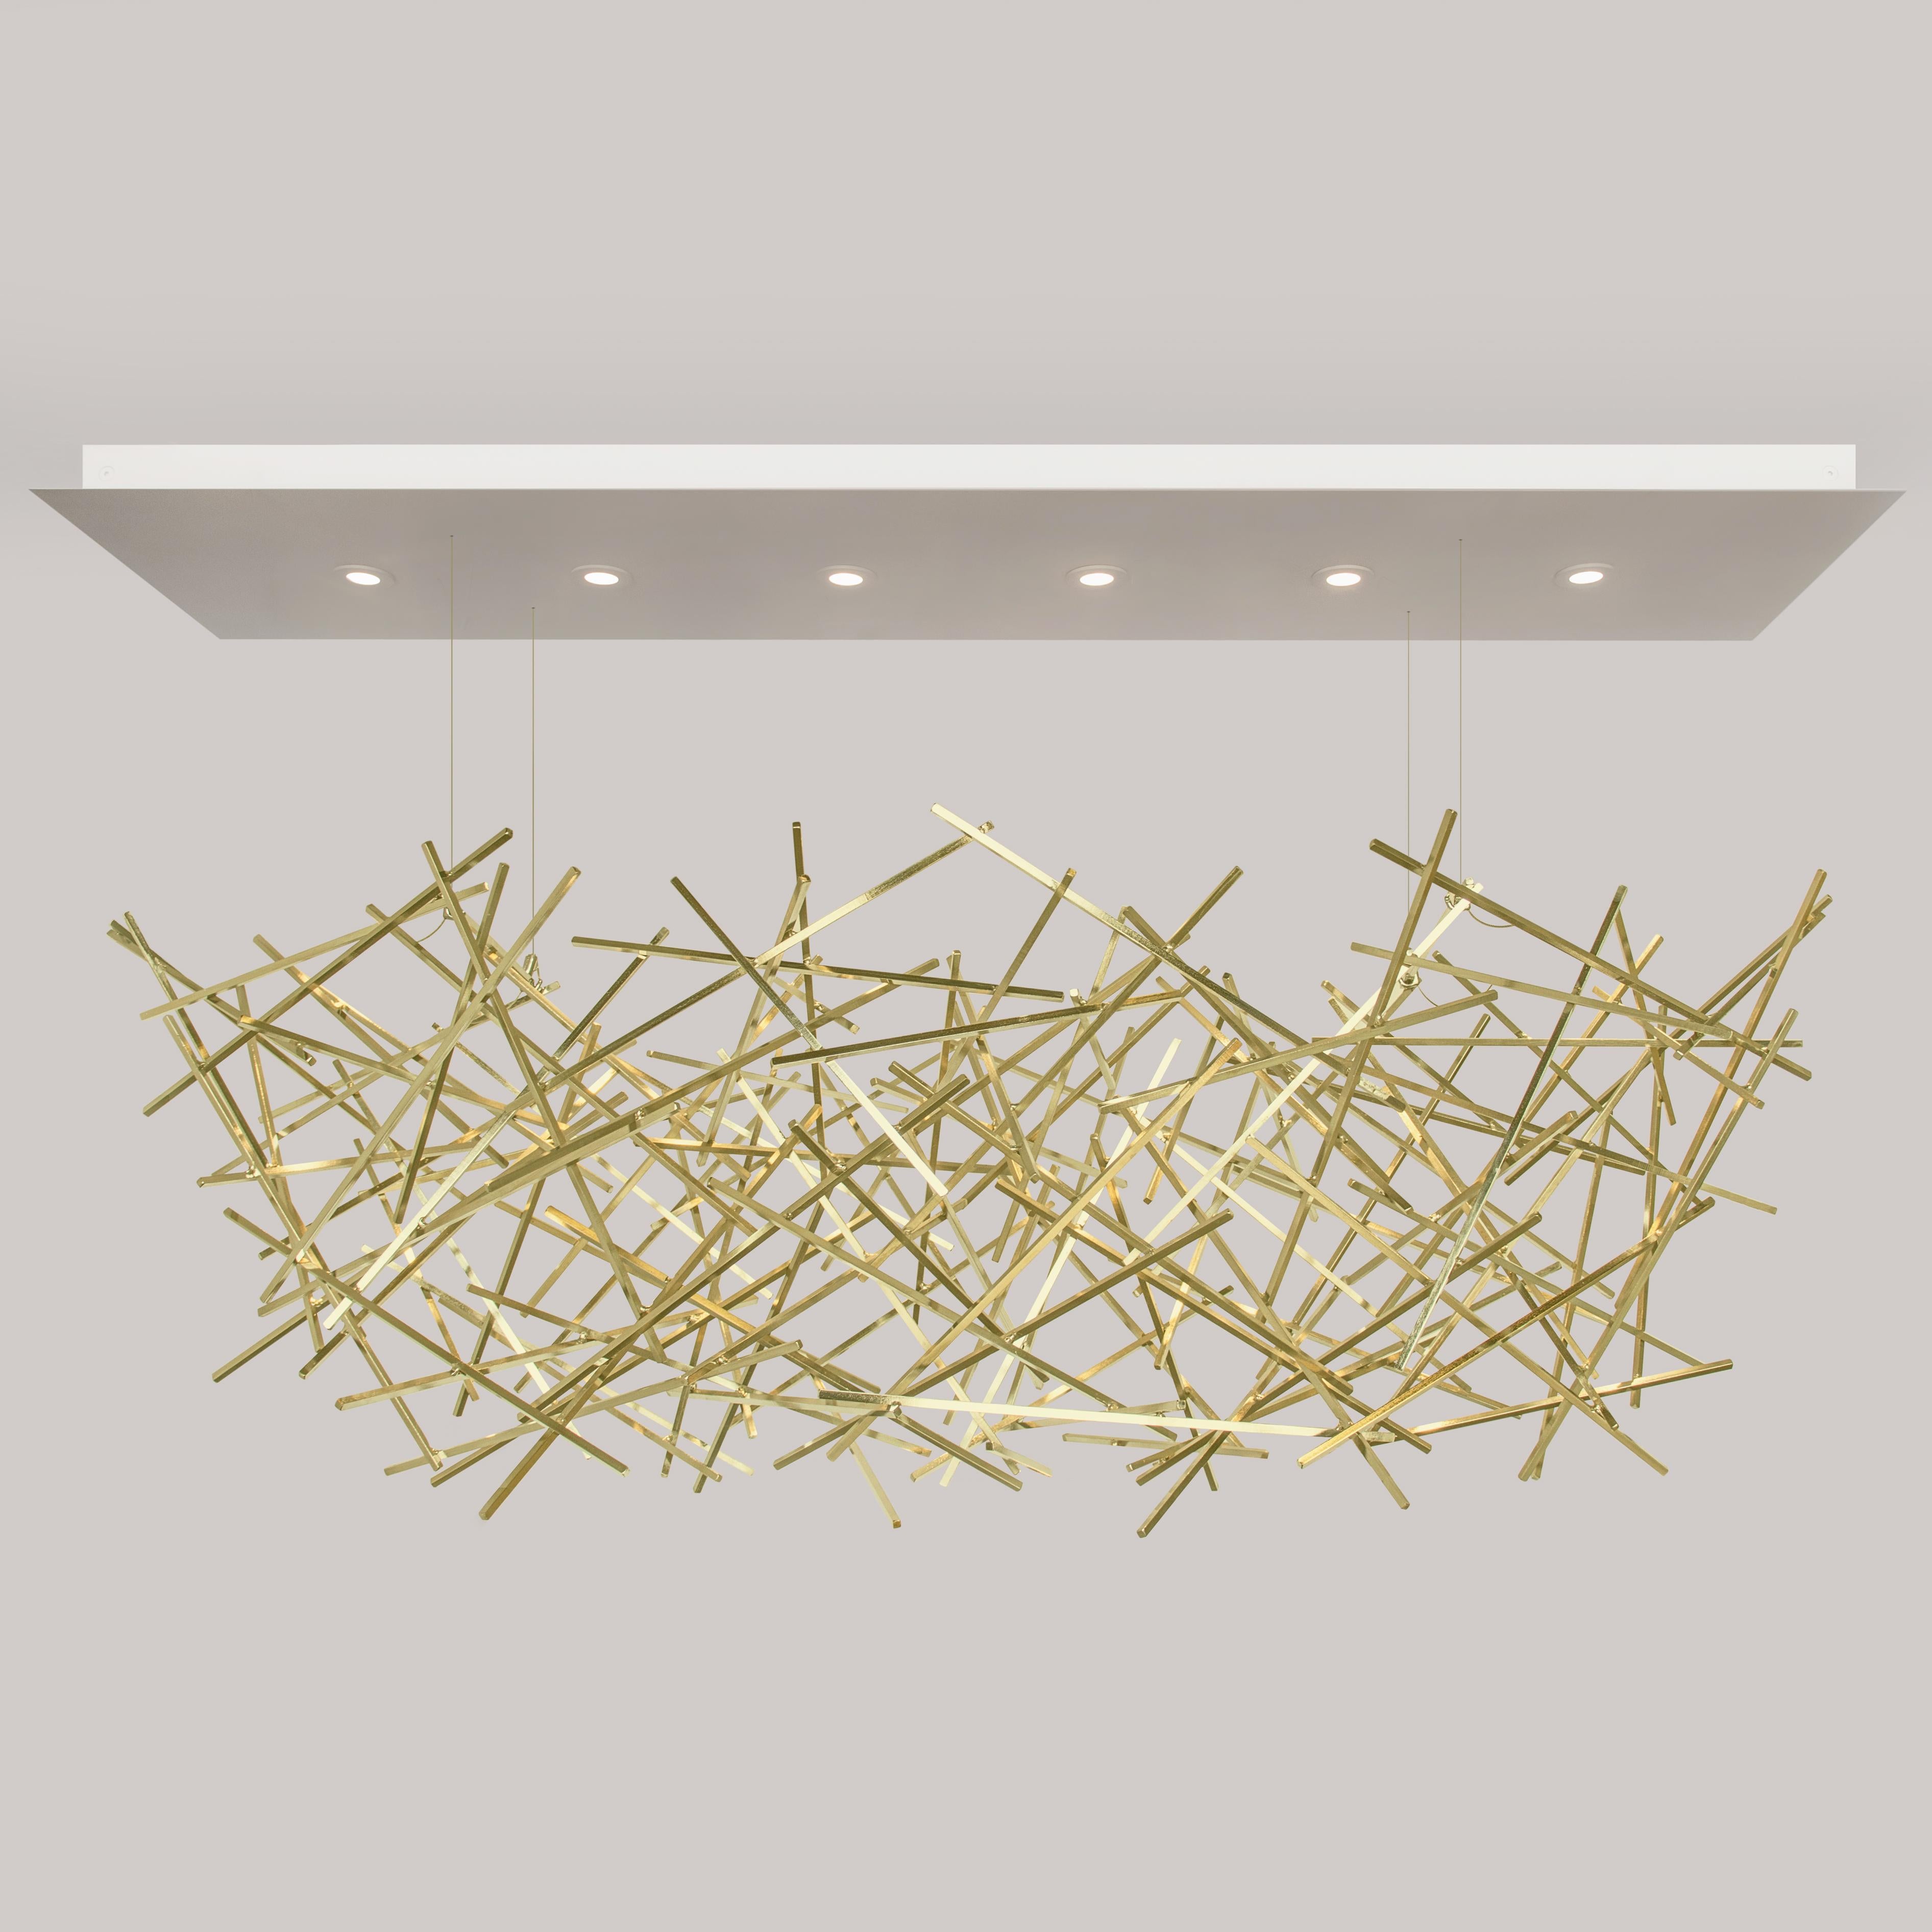 The CRISS-CROSS Chandelier was created from a genuine desire to blend art with lighting. It is a sculptural piece that is composed of cut steel rod, carefully arranged and welded in a seemingly random pattern. The CRISS-CROSS is lit from a canopy